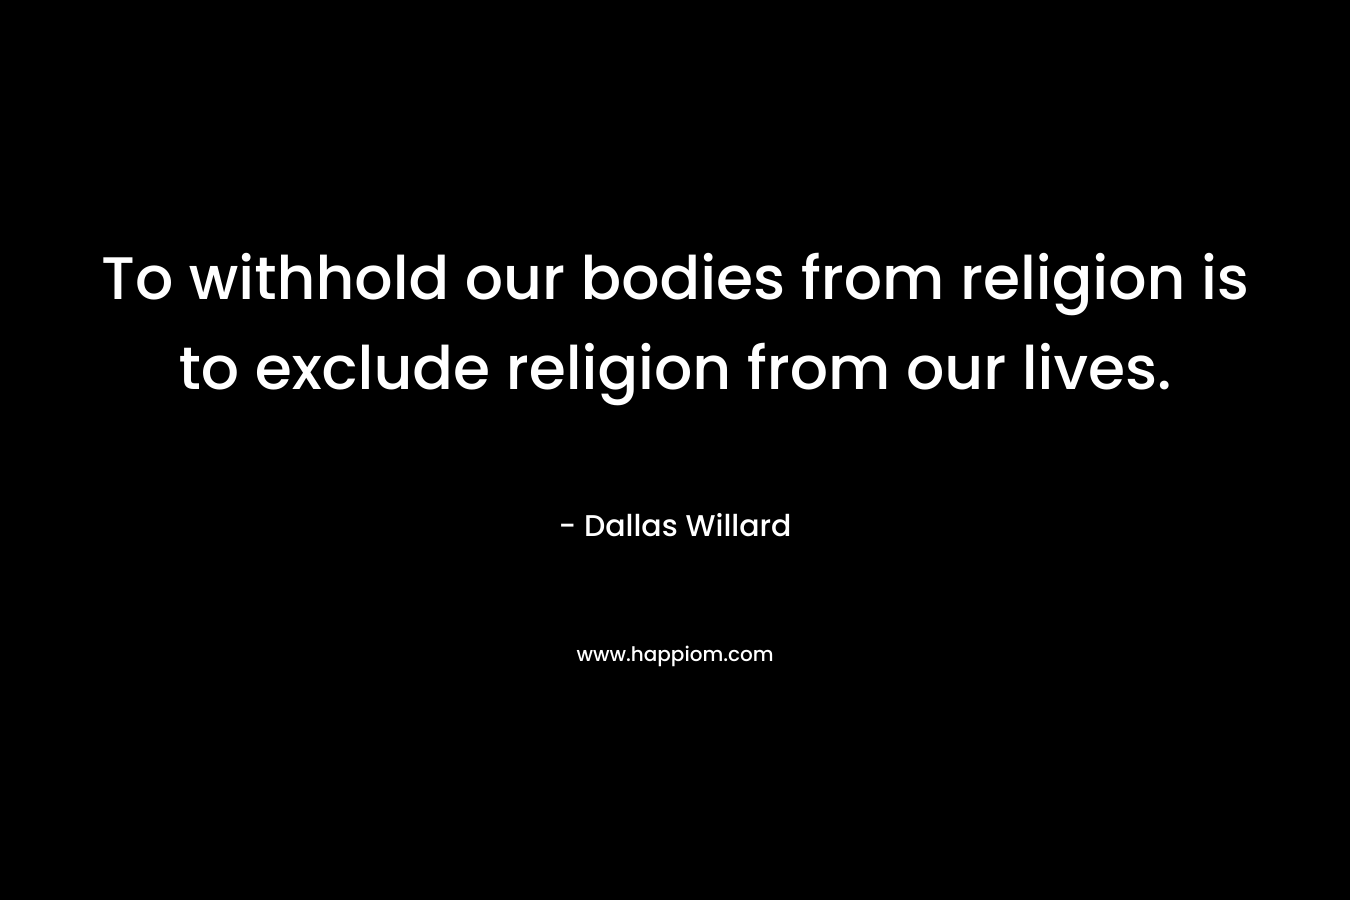 To withhold our bodies from religion is to exclude religion from our lives.